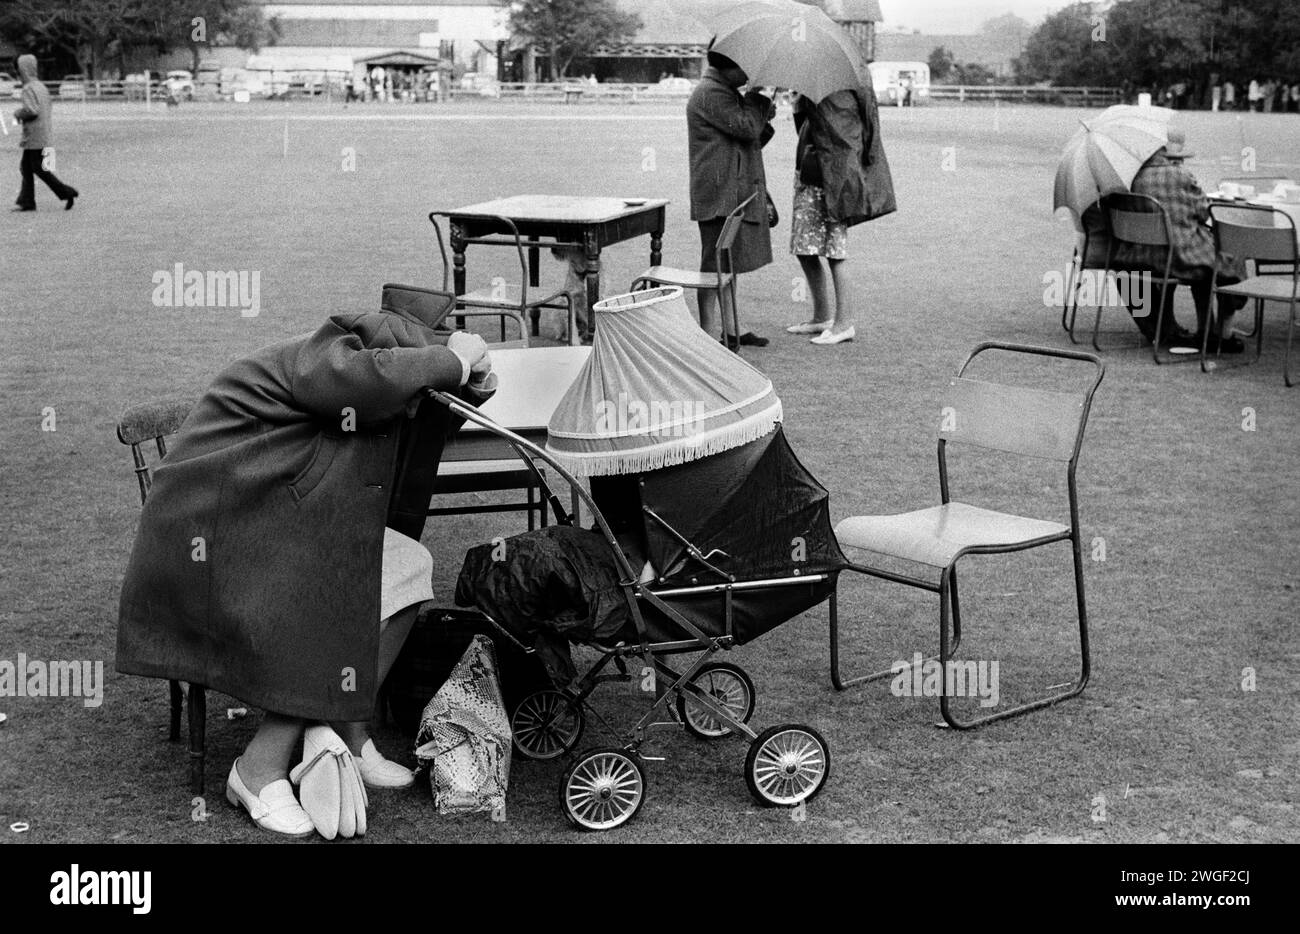 Mother with baby in pram sheltering from rain. 1970s UK. Church of St. John the Baptist annual summer church fete, women shelter from the rain. Cirencester, Gloucestershire. 1974 1970s UK HOMER SYKES Stock Photo